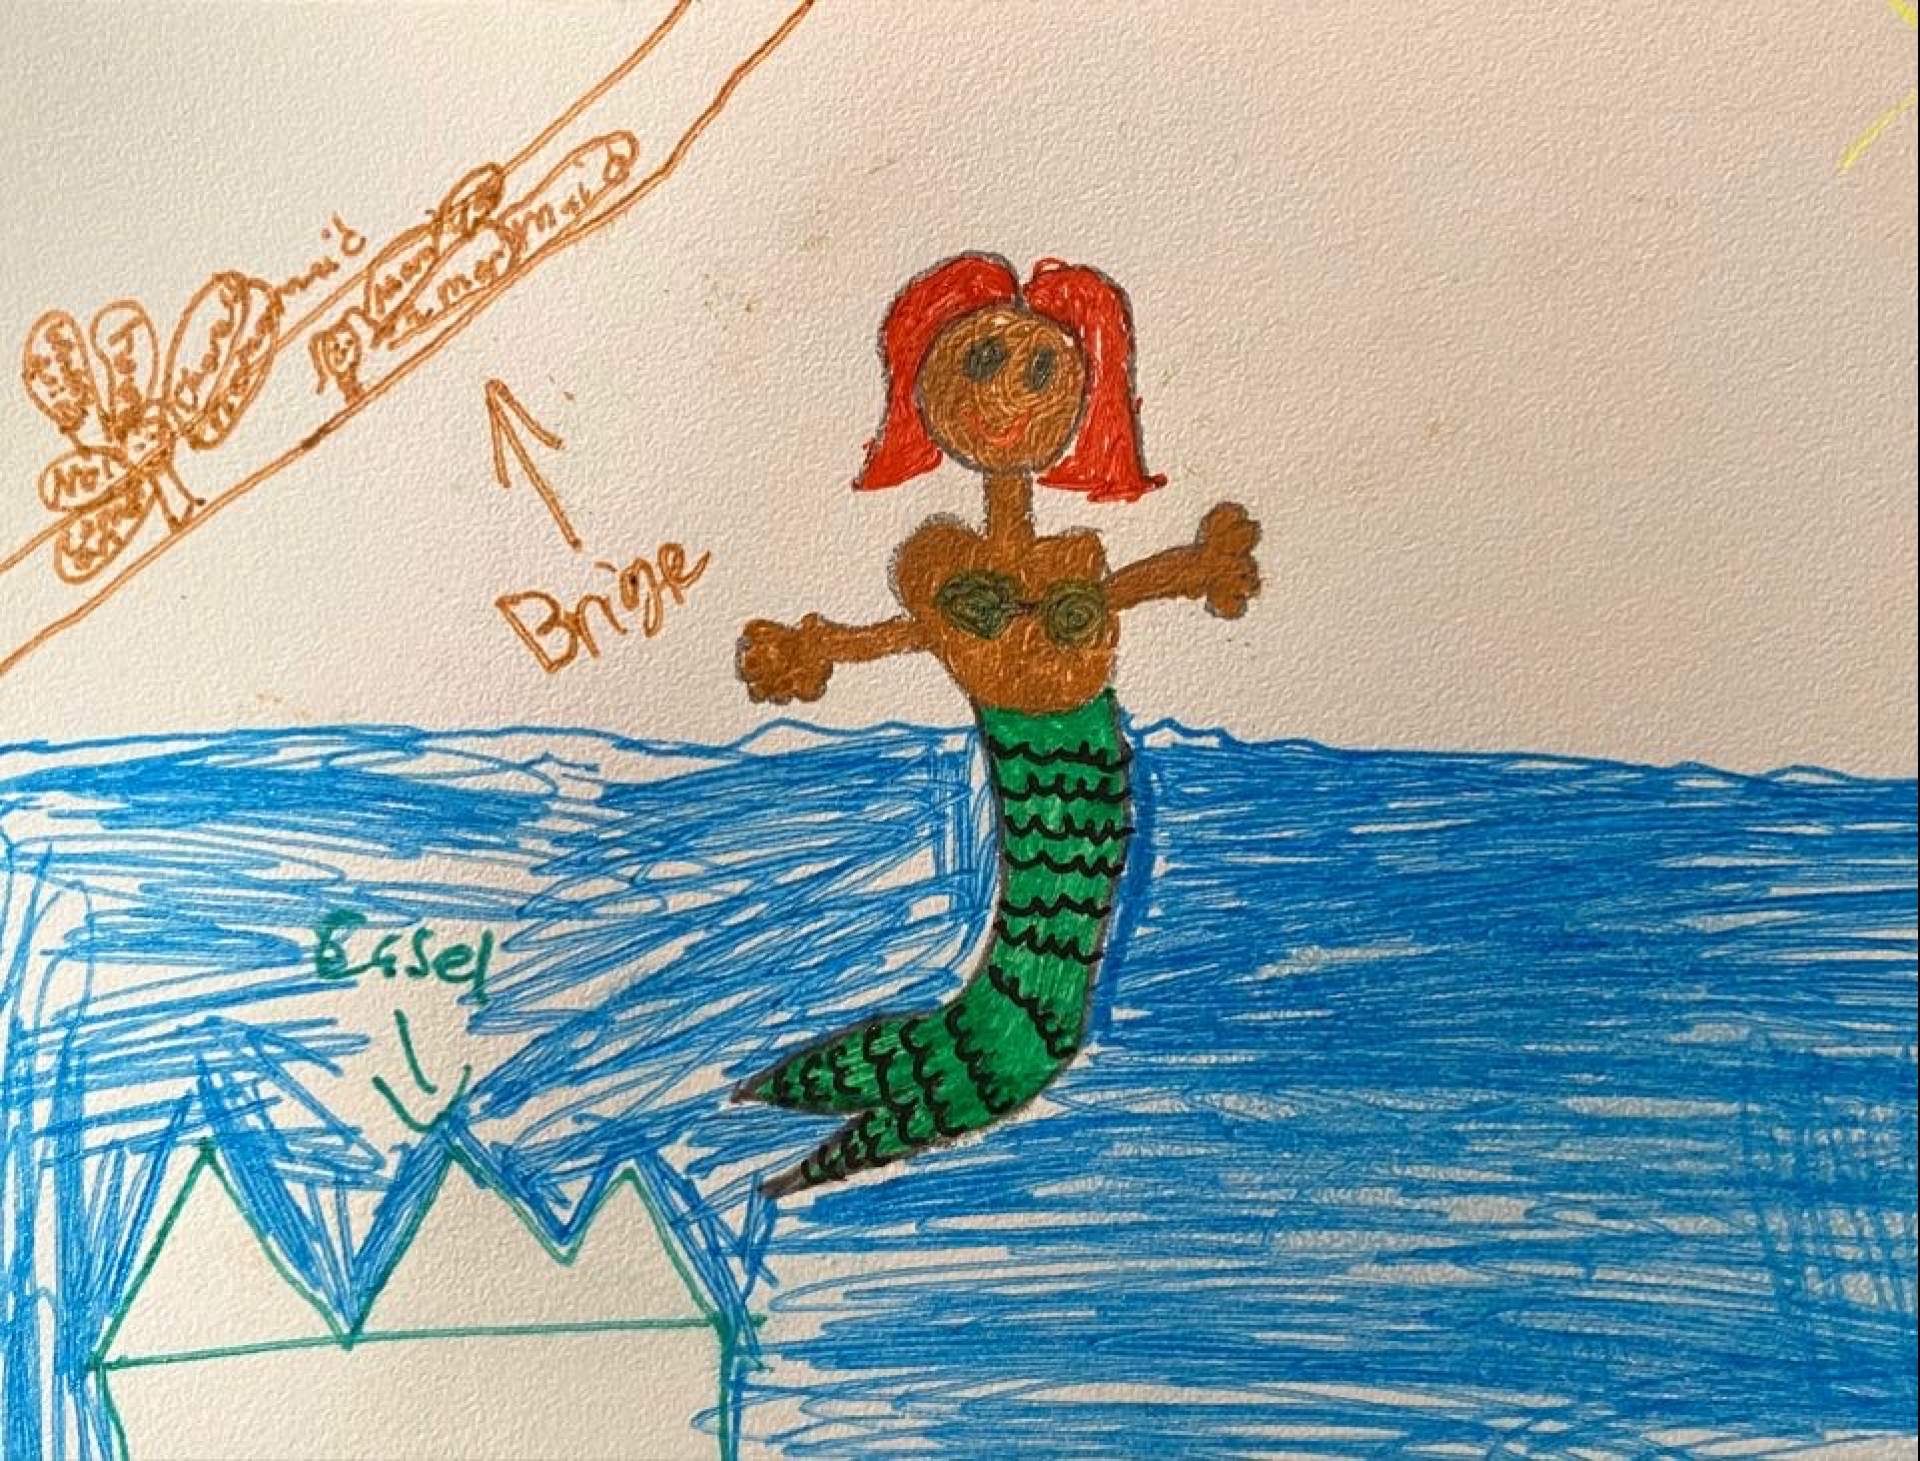 BPAC Sketch Together: What Do You Want to Discover in the Ocean?